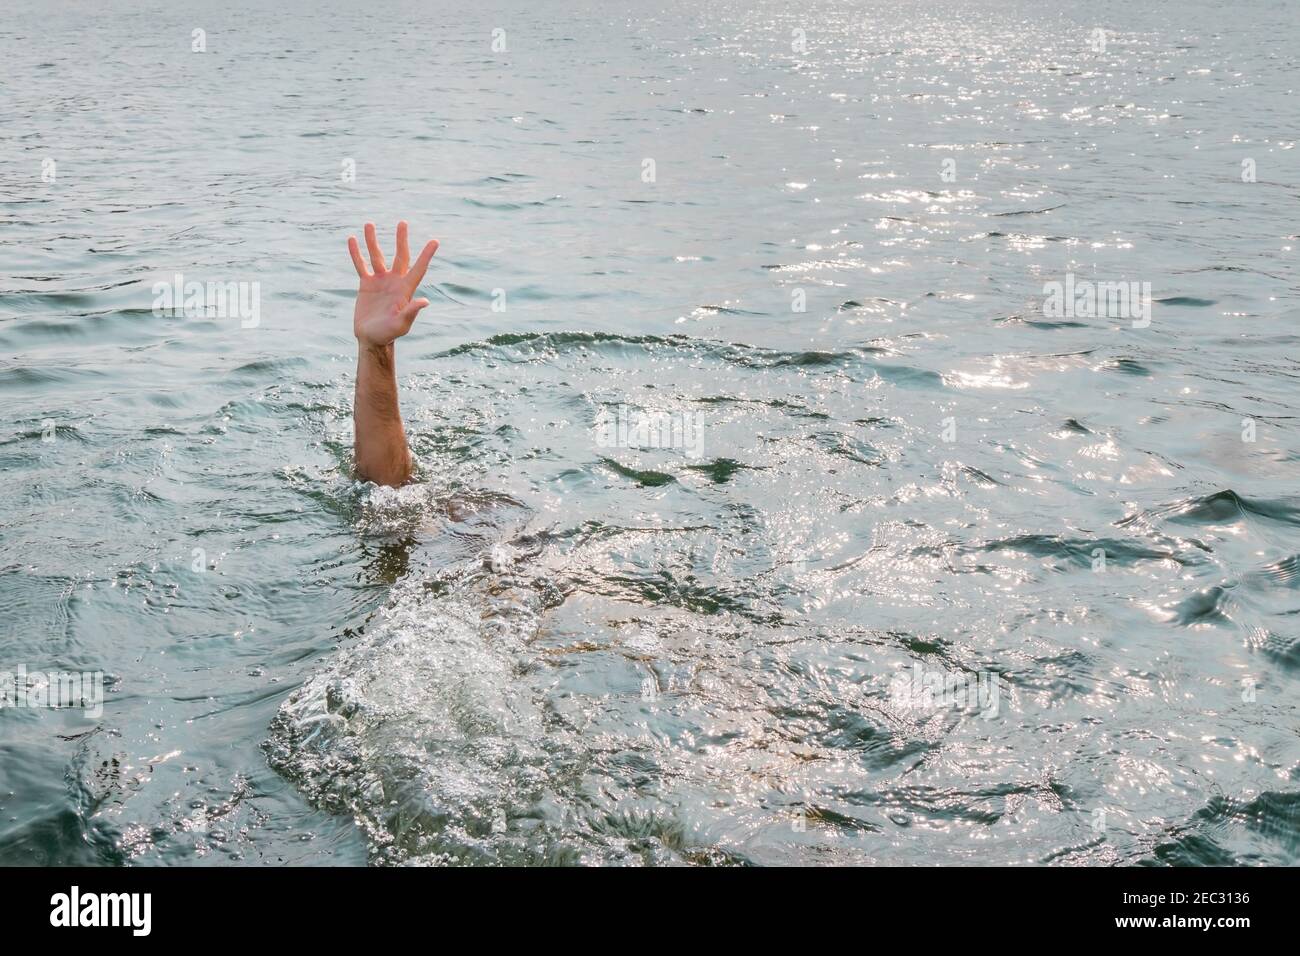 Drowning Man High Resolution Stock Photography and Images - Alamy